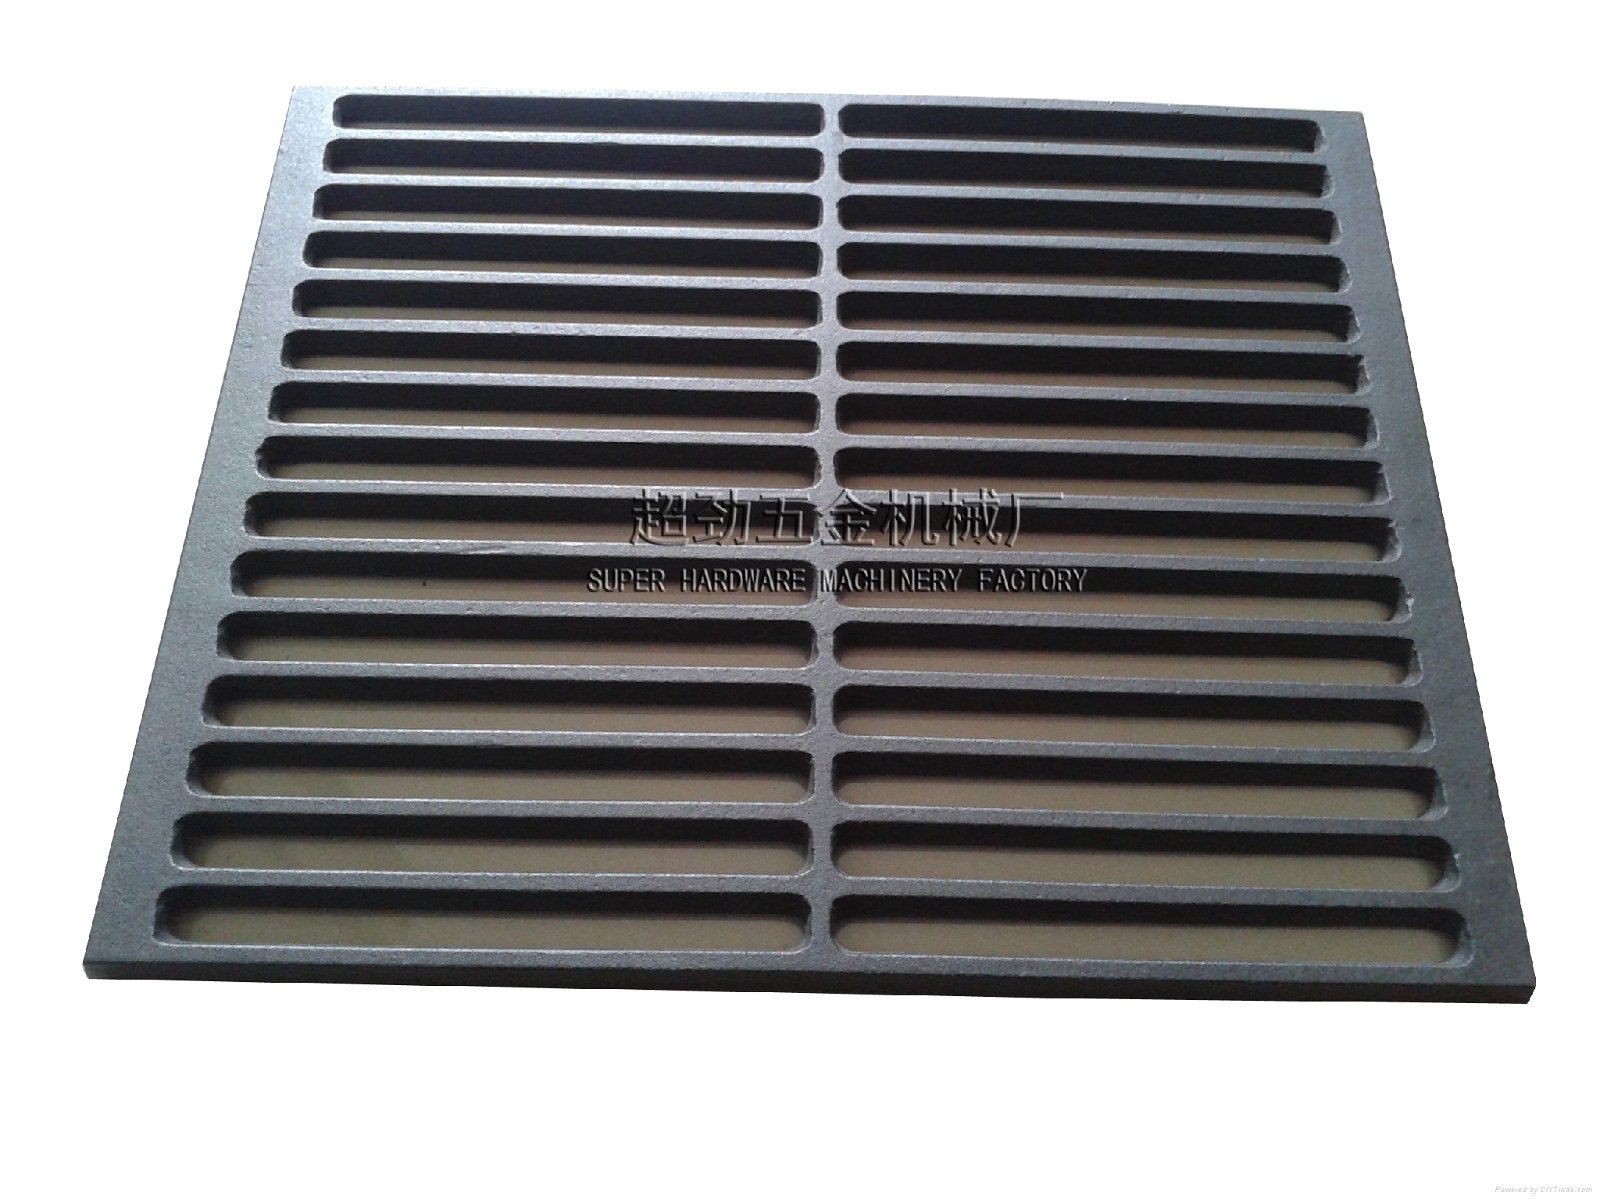 BBQ Grill Cast Iron Cooking Grate